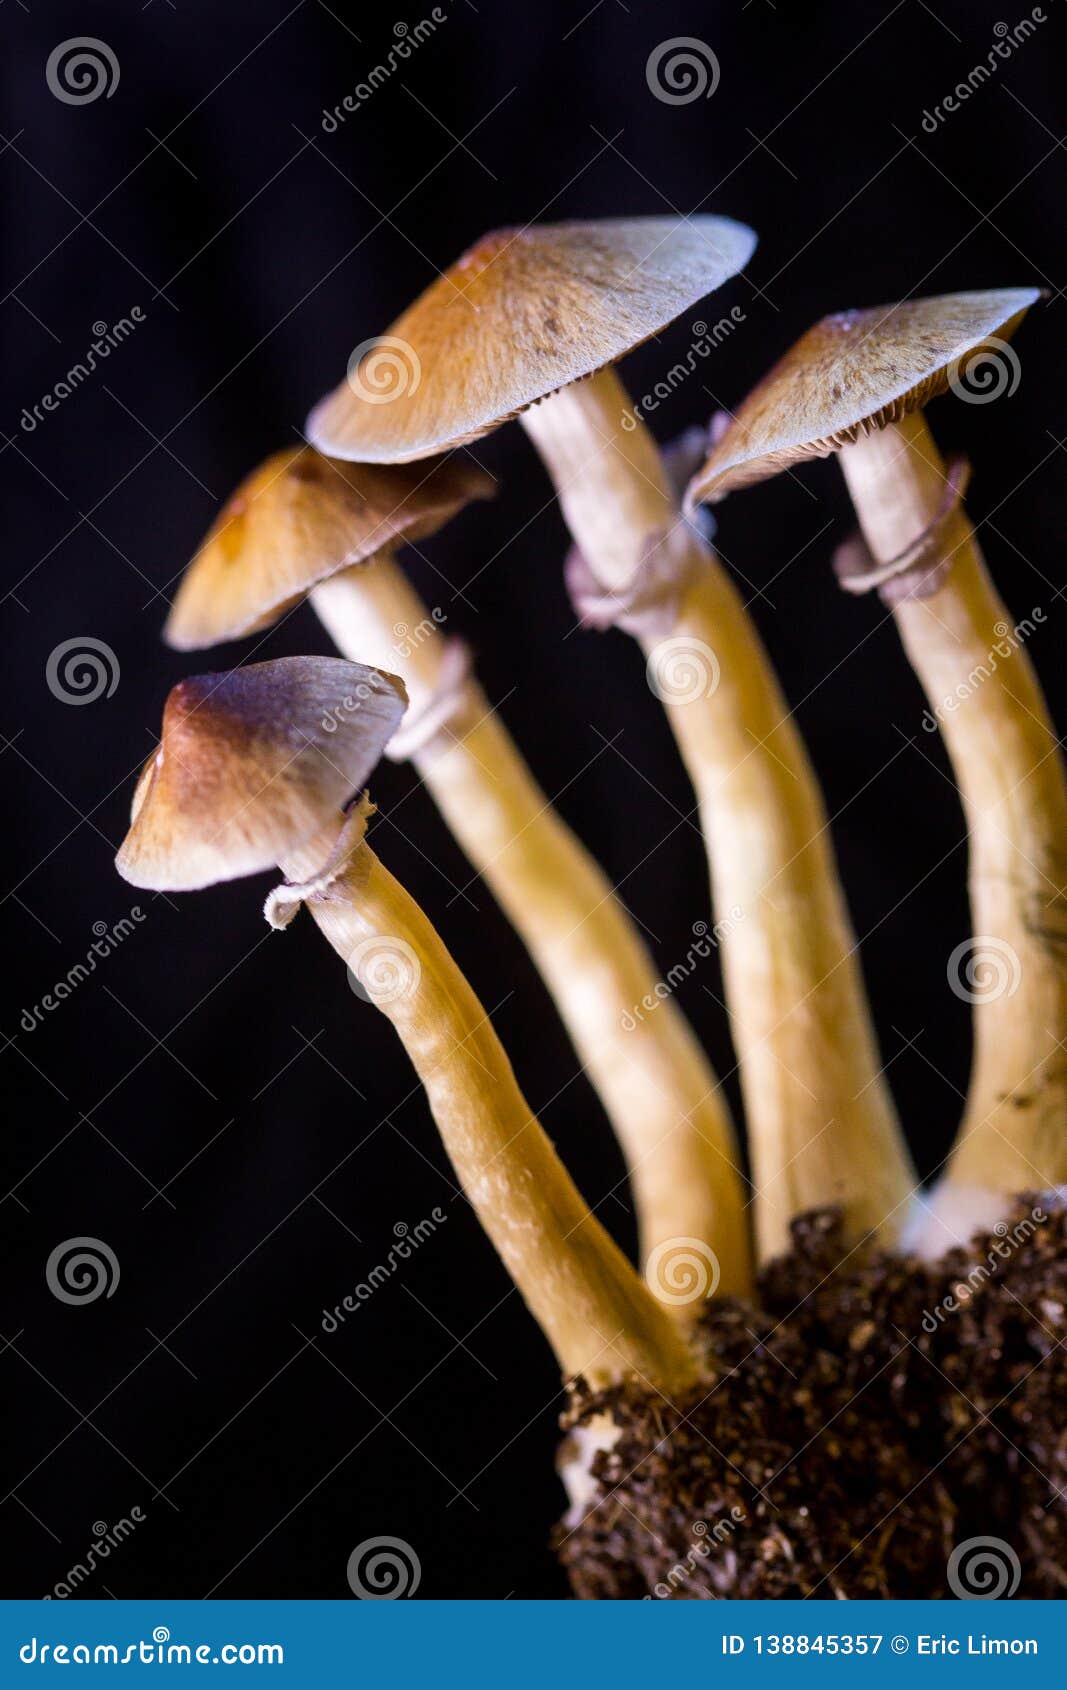 psilocybe cubensis - four fresh magic mushrooms in soil with a black background